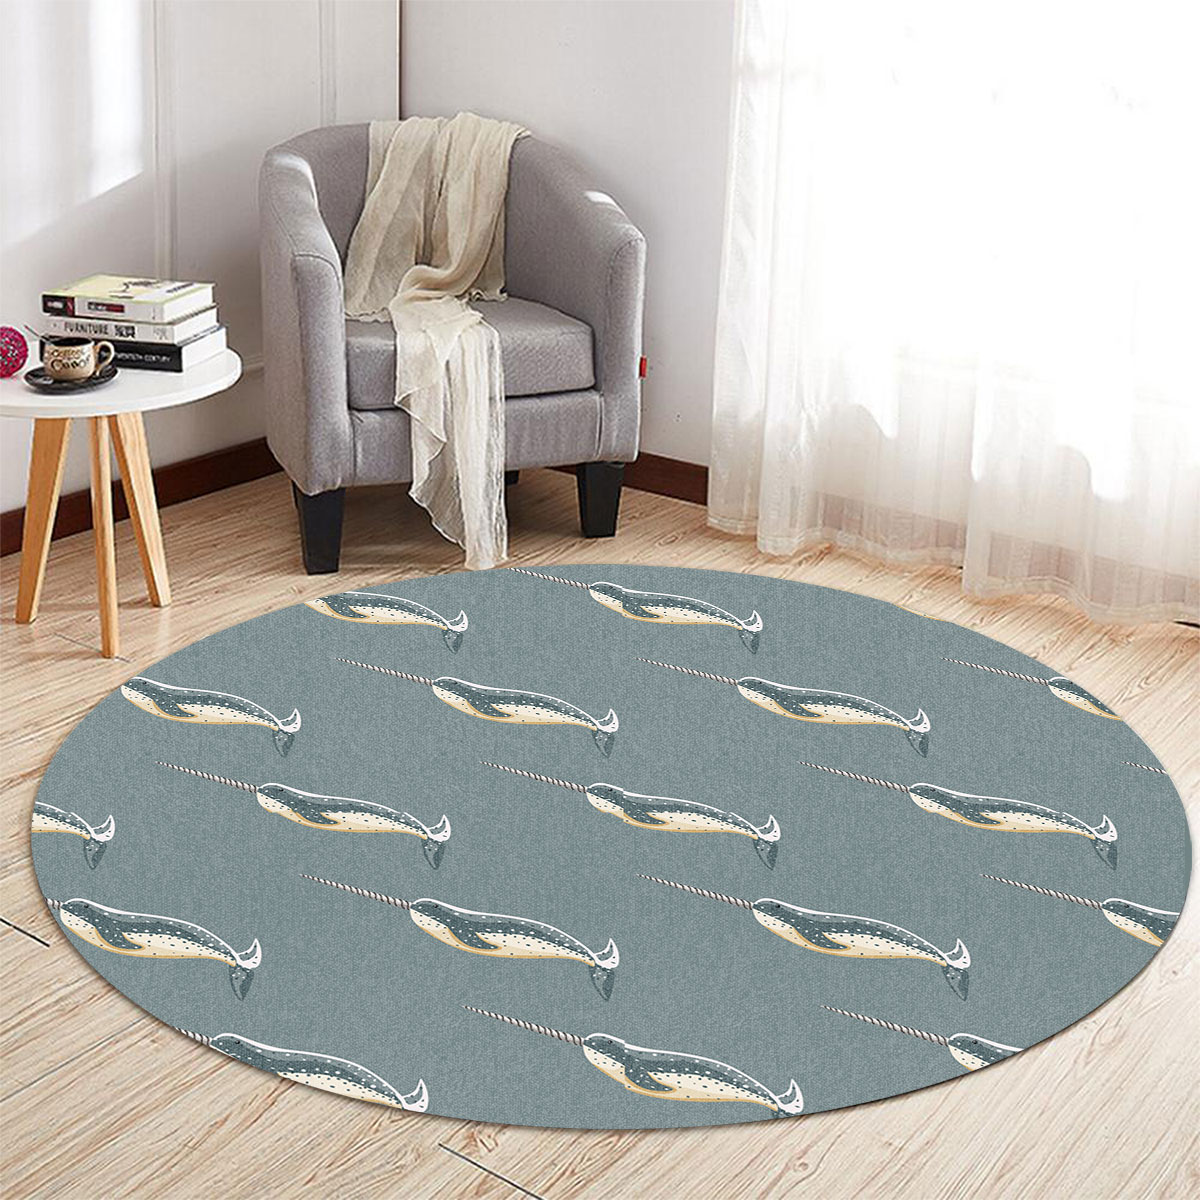 Deep Sea Narwhal On Teal Round Carpet